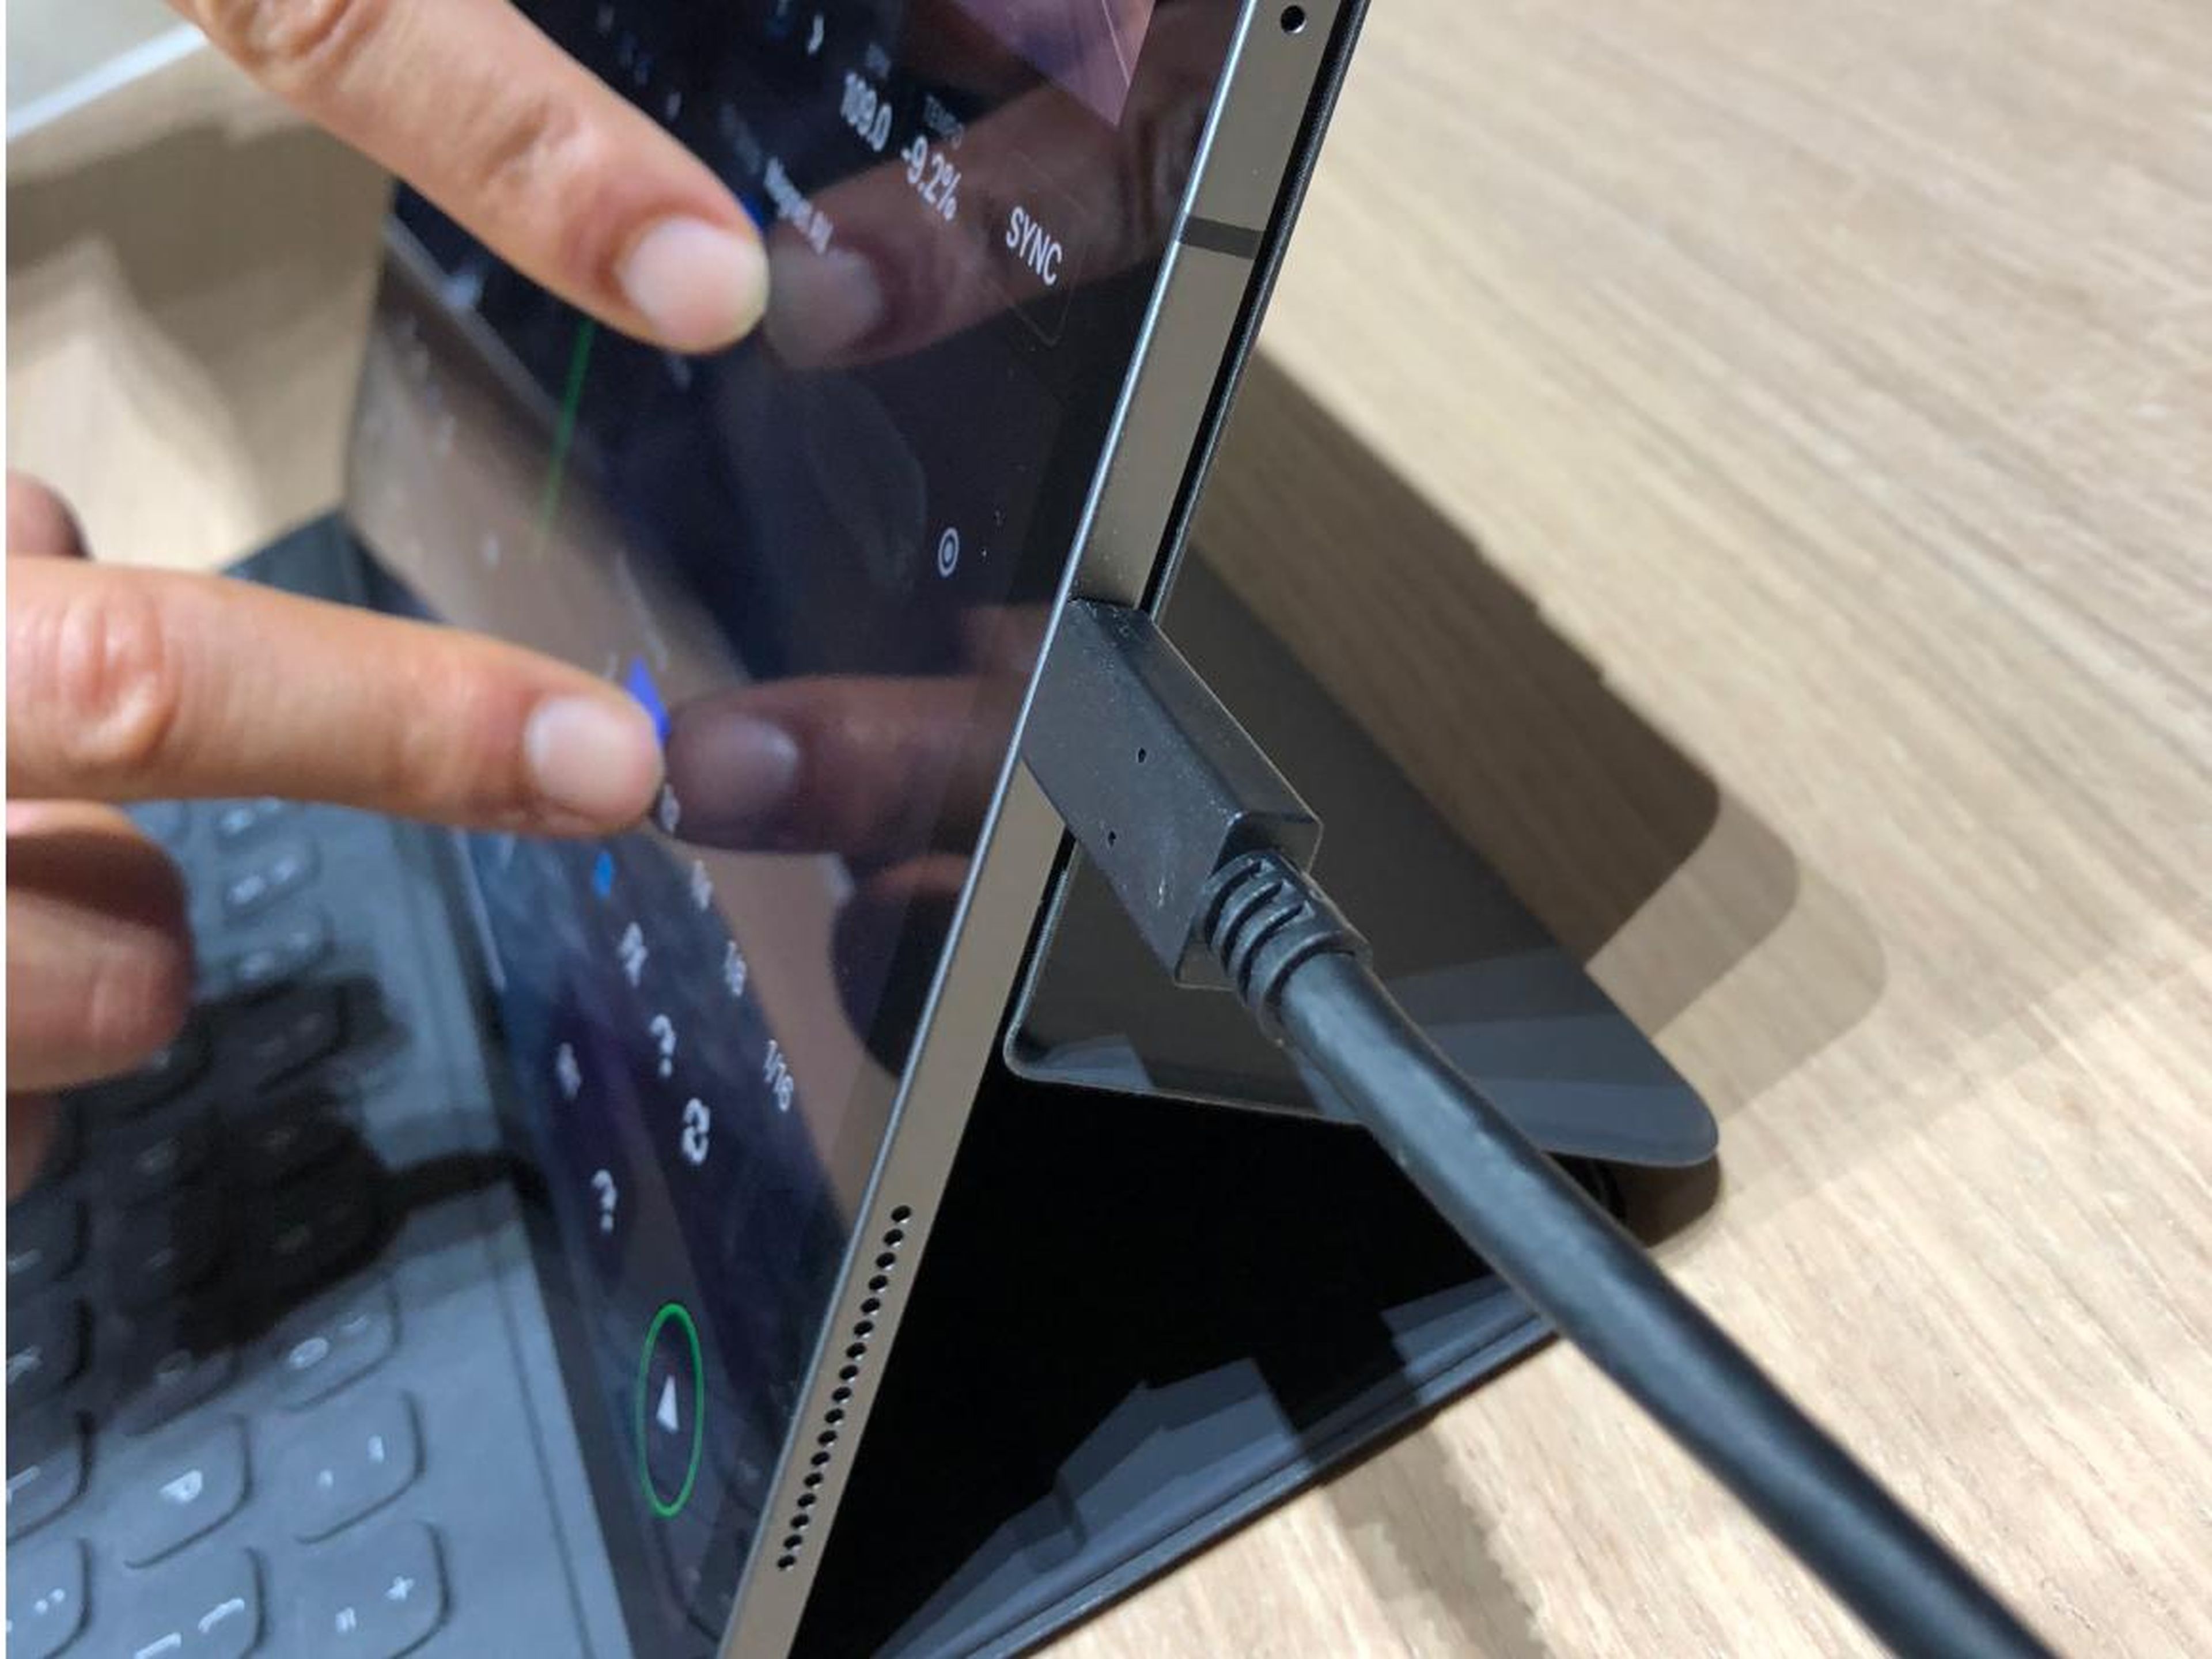 Here's what it looks like when a monitor is plugged into the iPad Pro's USB-C port.